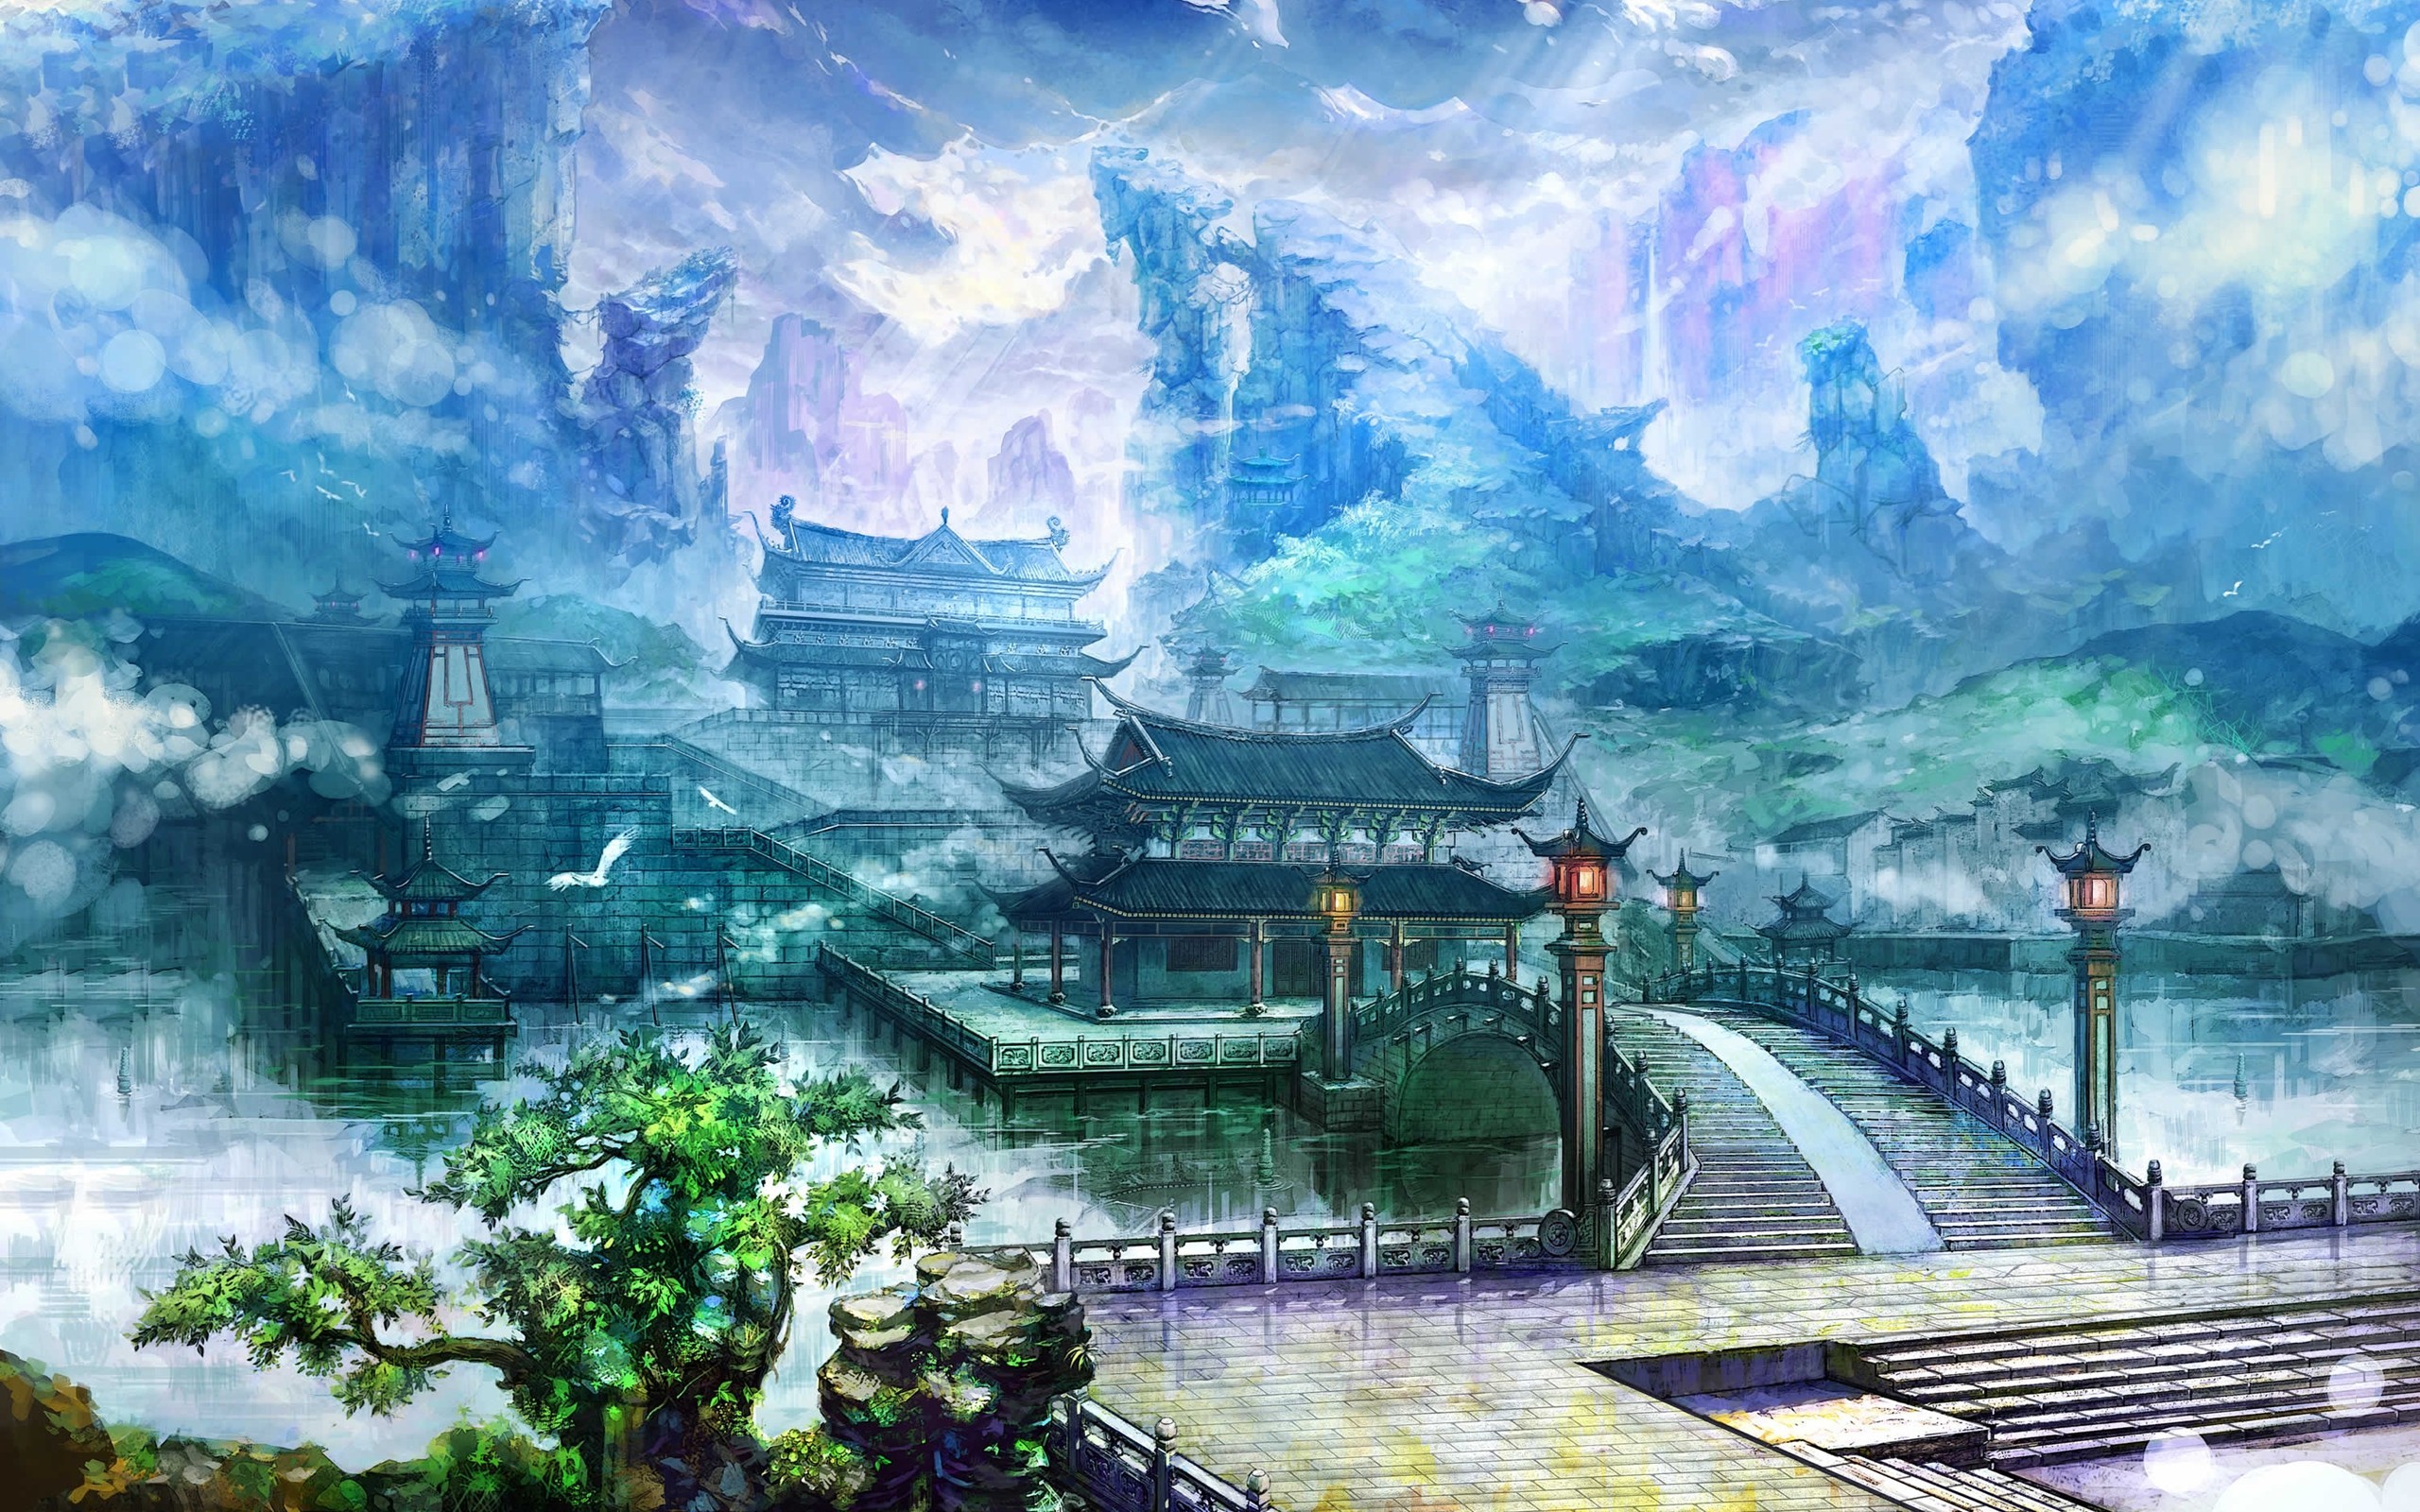 Download wallpaper 1366x768 chinas ancient town dragon fantasy art  tablet laptop 1366x768 hd background 27877